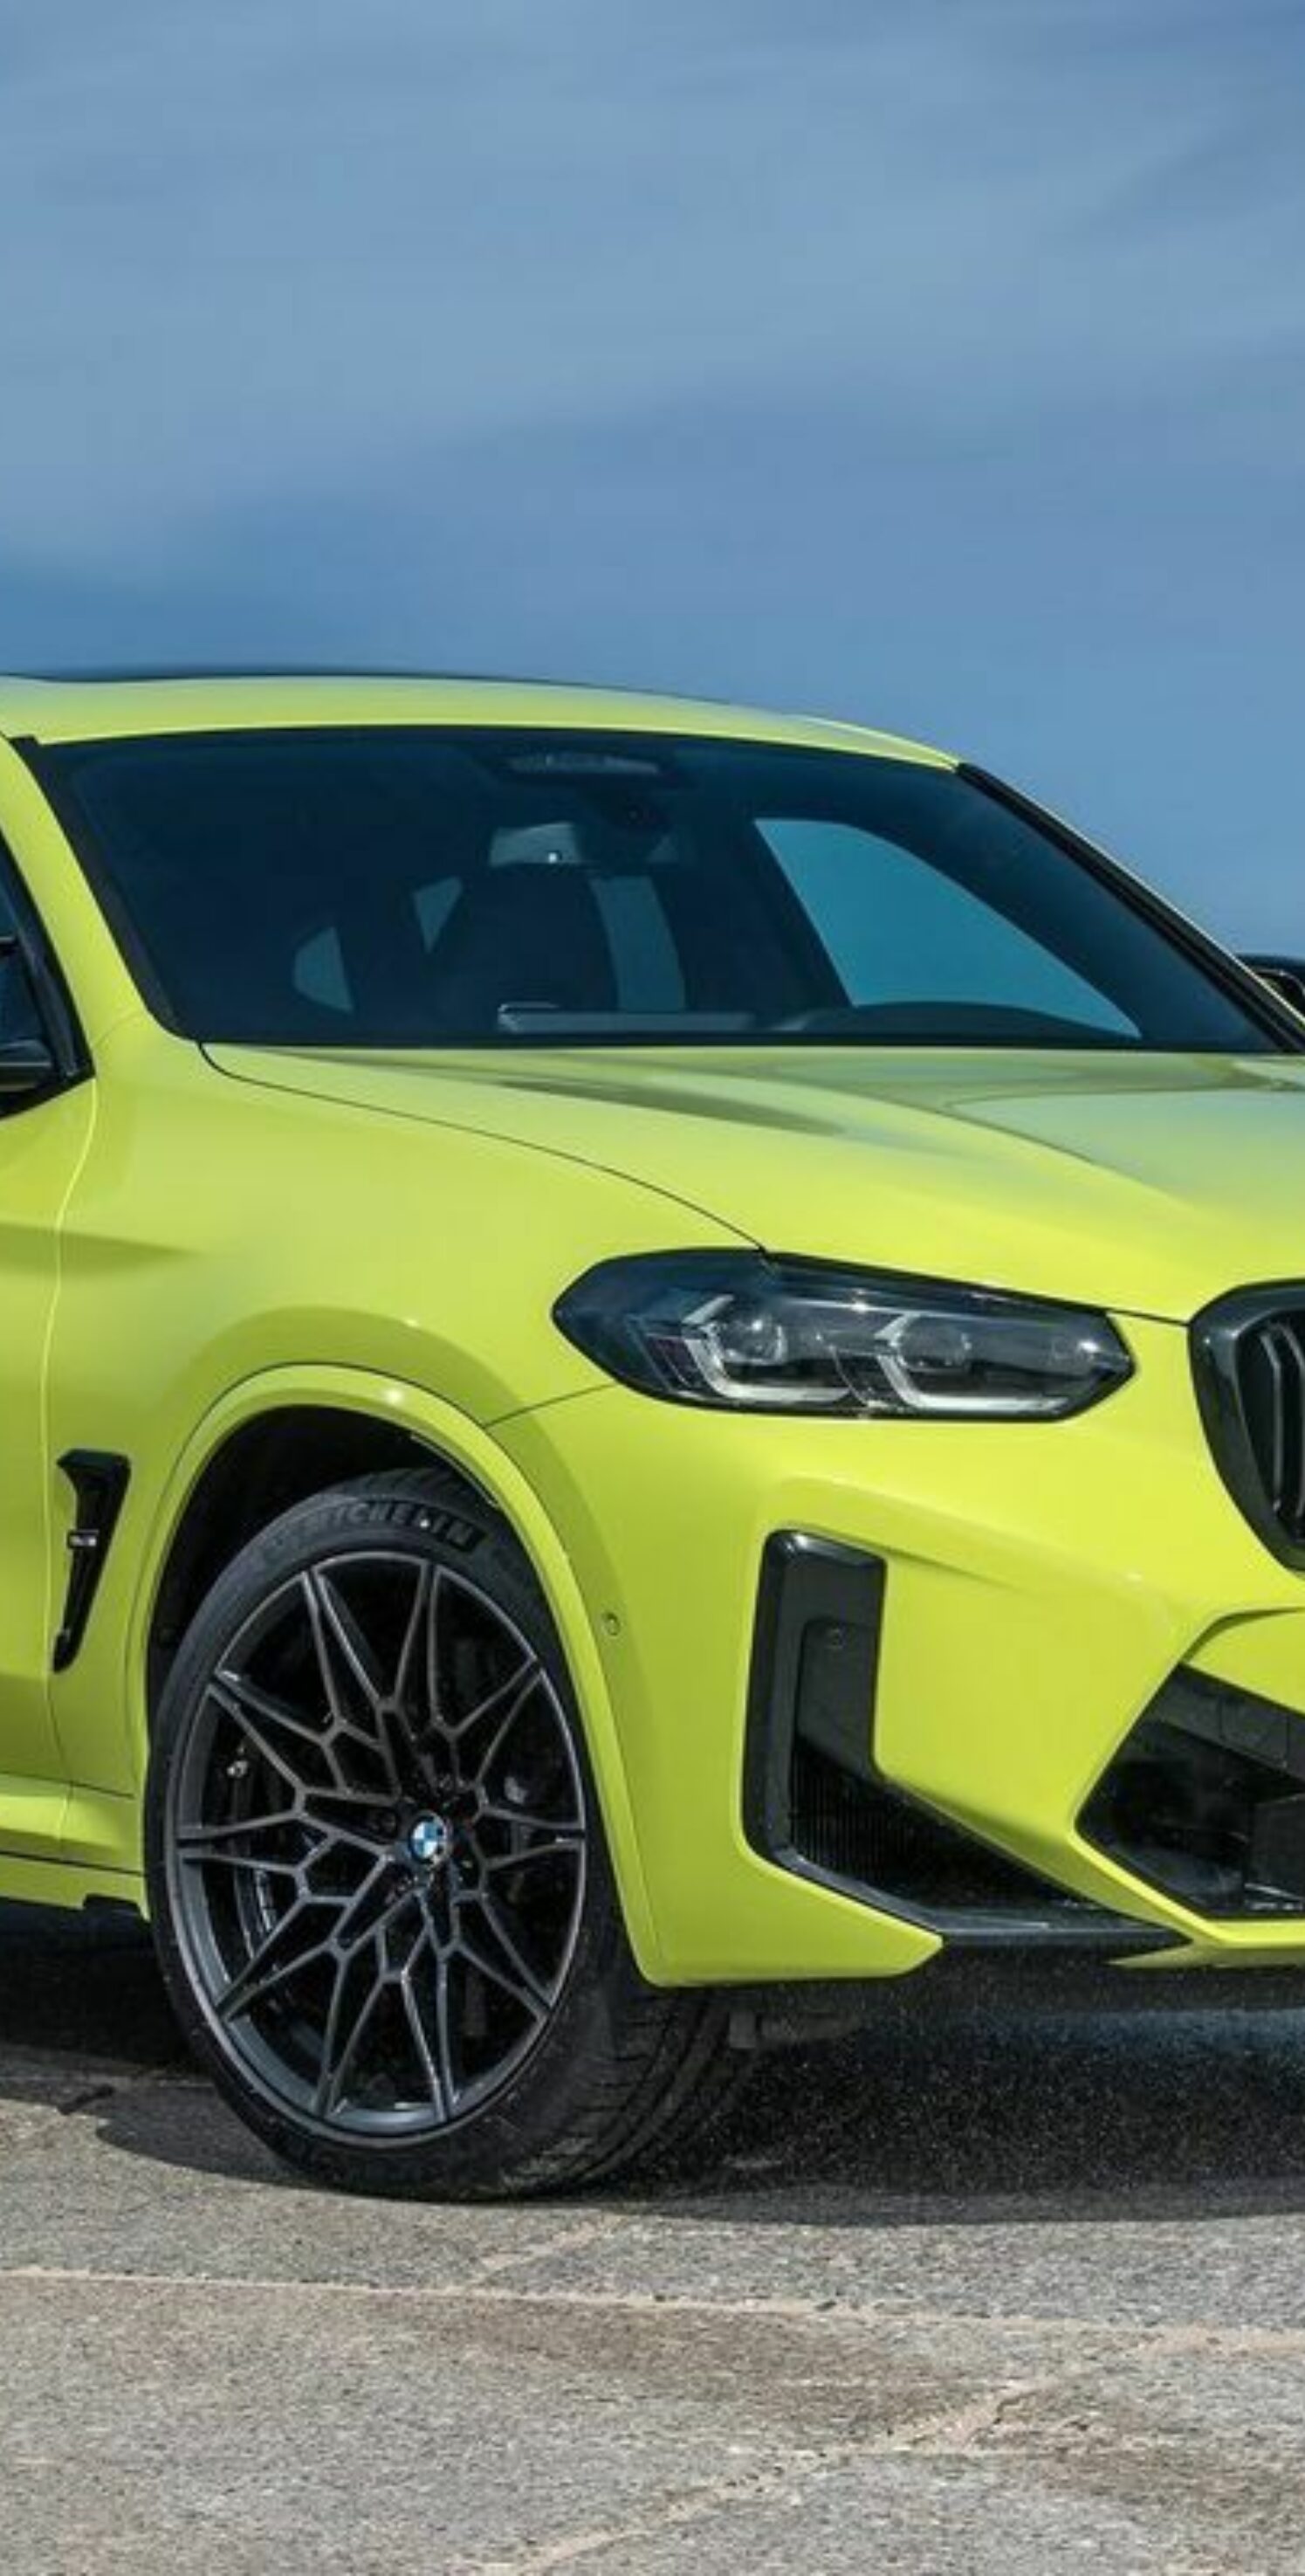 https://autofilter.sk/assets/images/x4-m/gallery/bmw-x4-m-competition-2022_10-galeria.jpg - obrazok